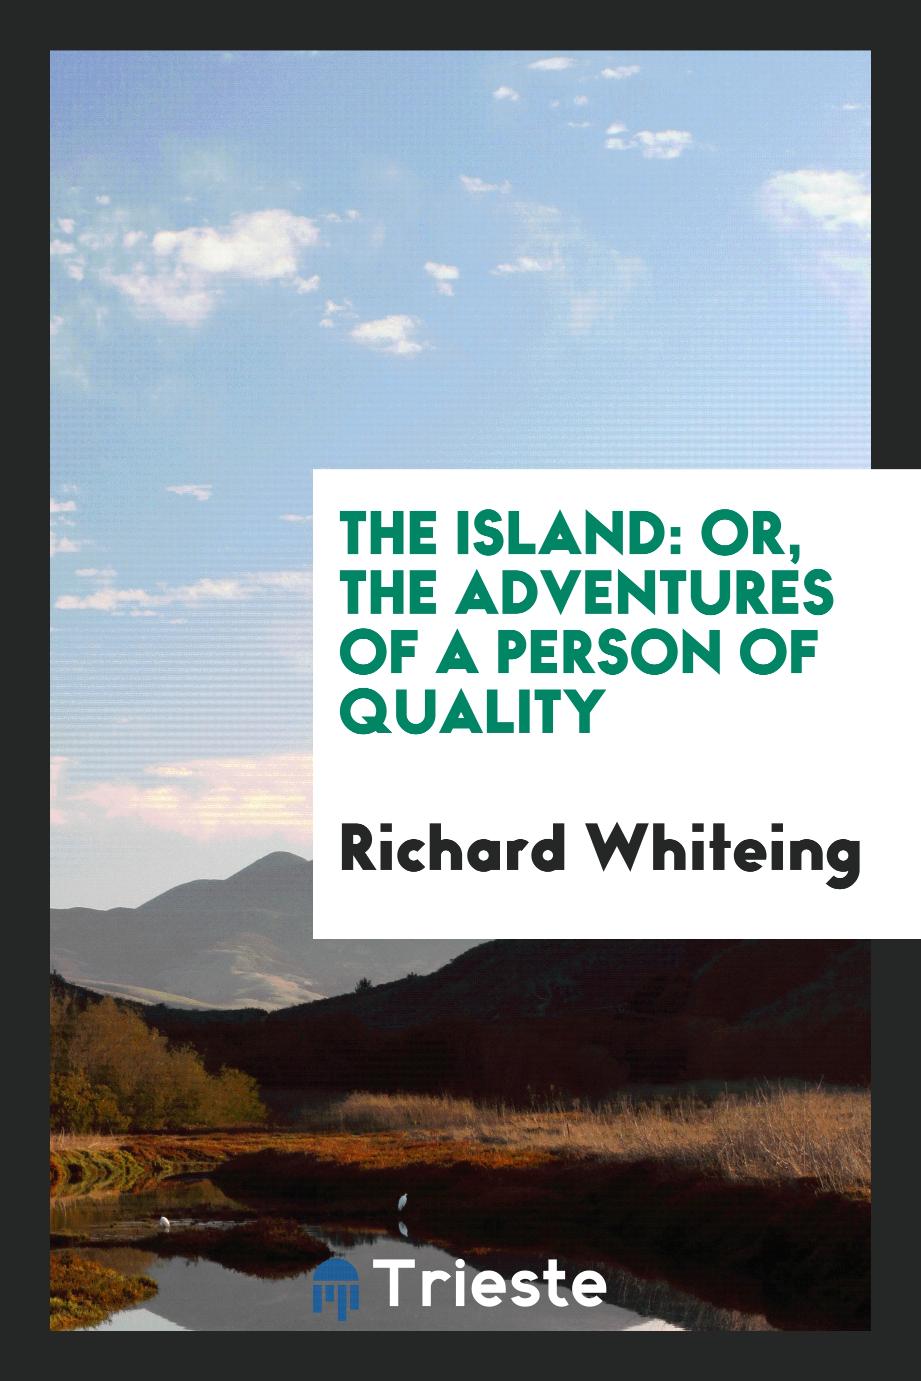 The Island: Or, The Adventures of a Person of Quality